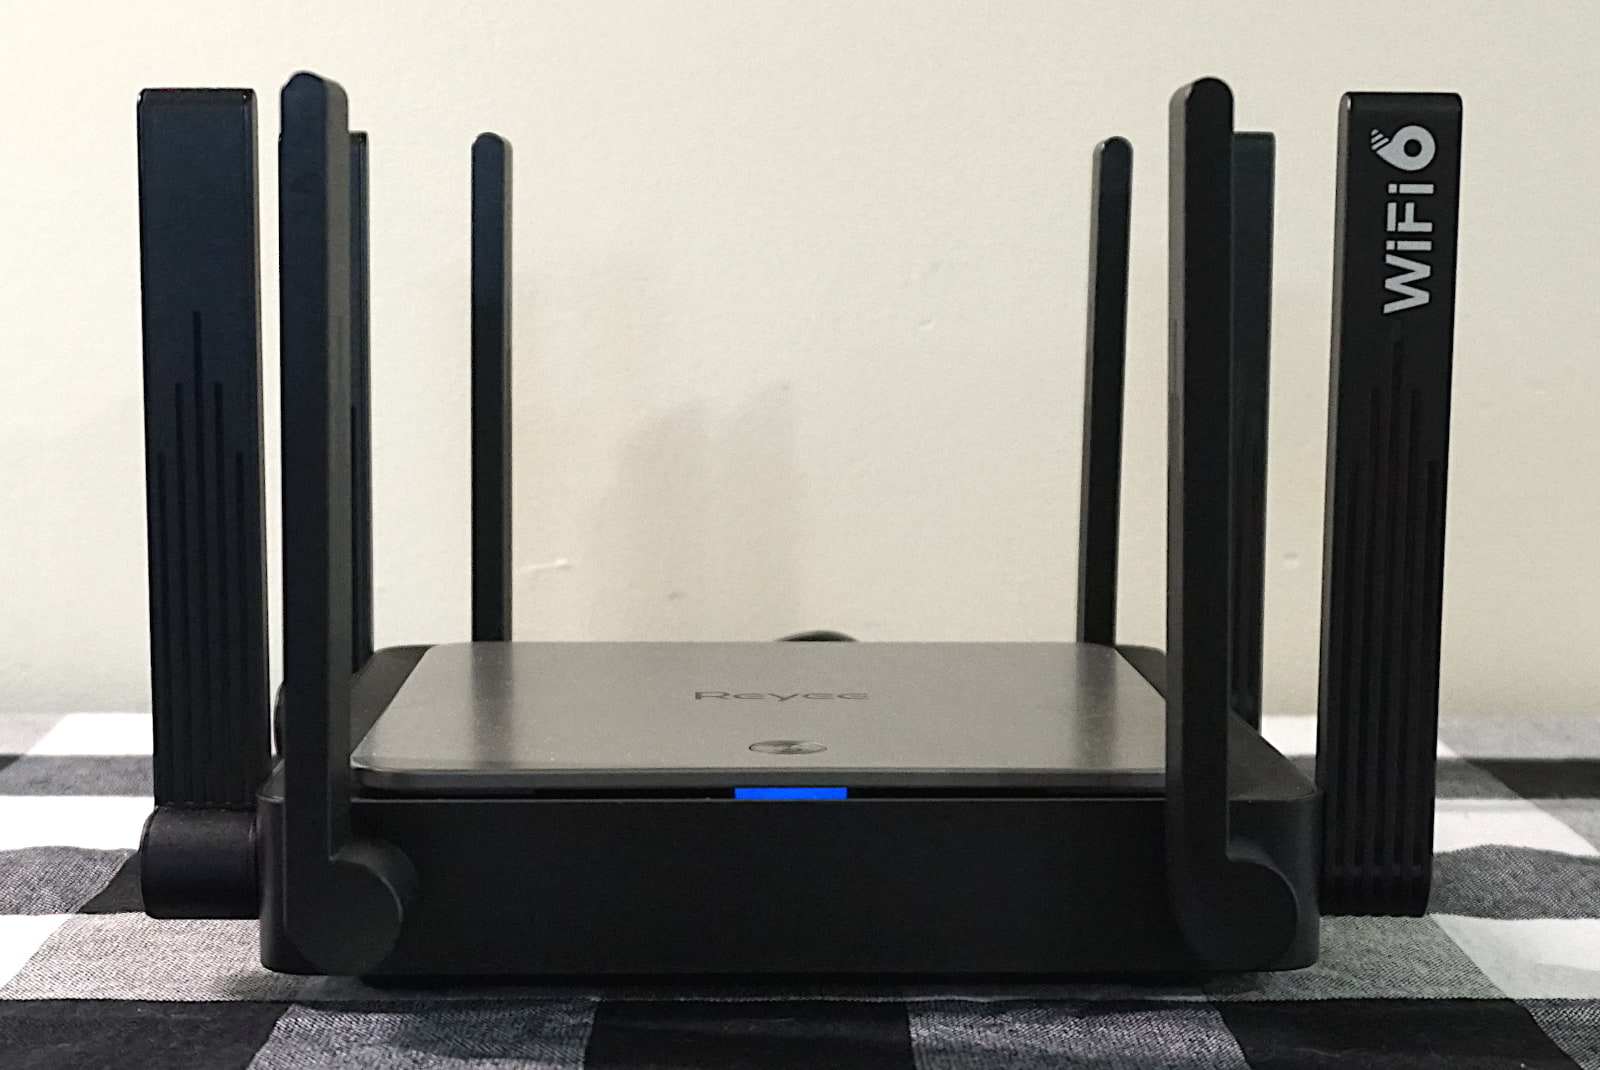 Front view of Reyee RG-E5 router